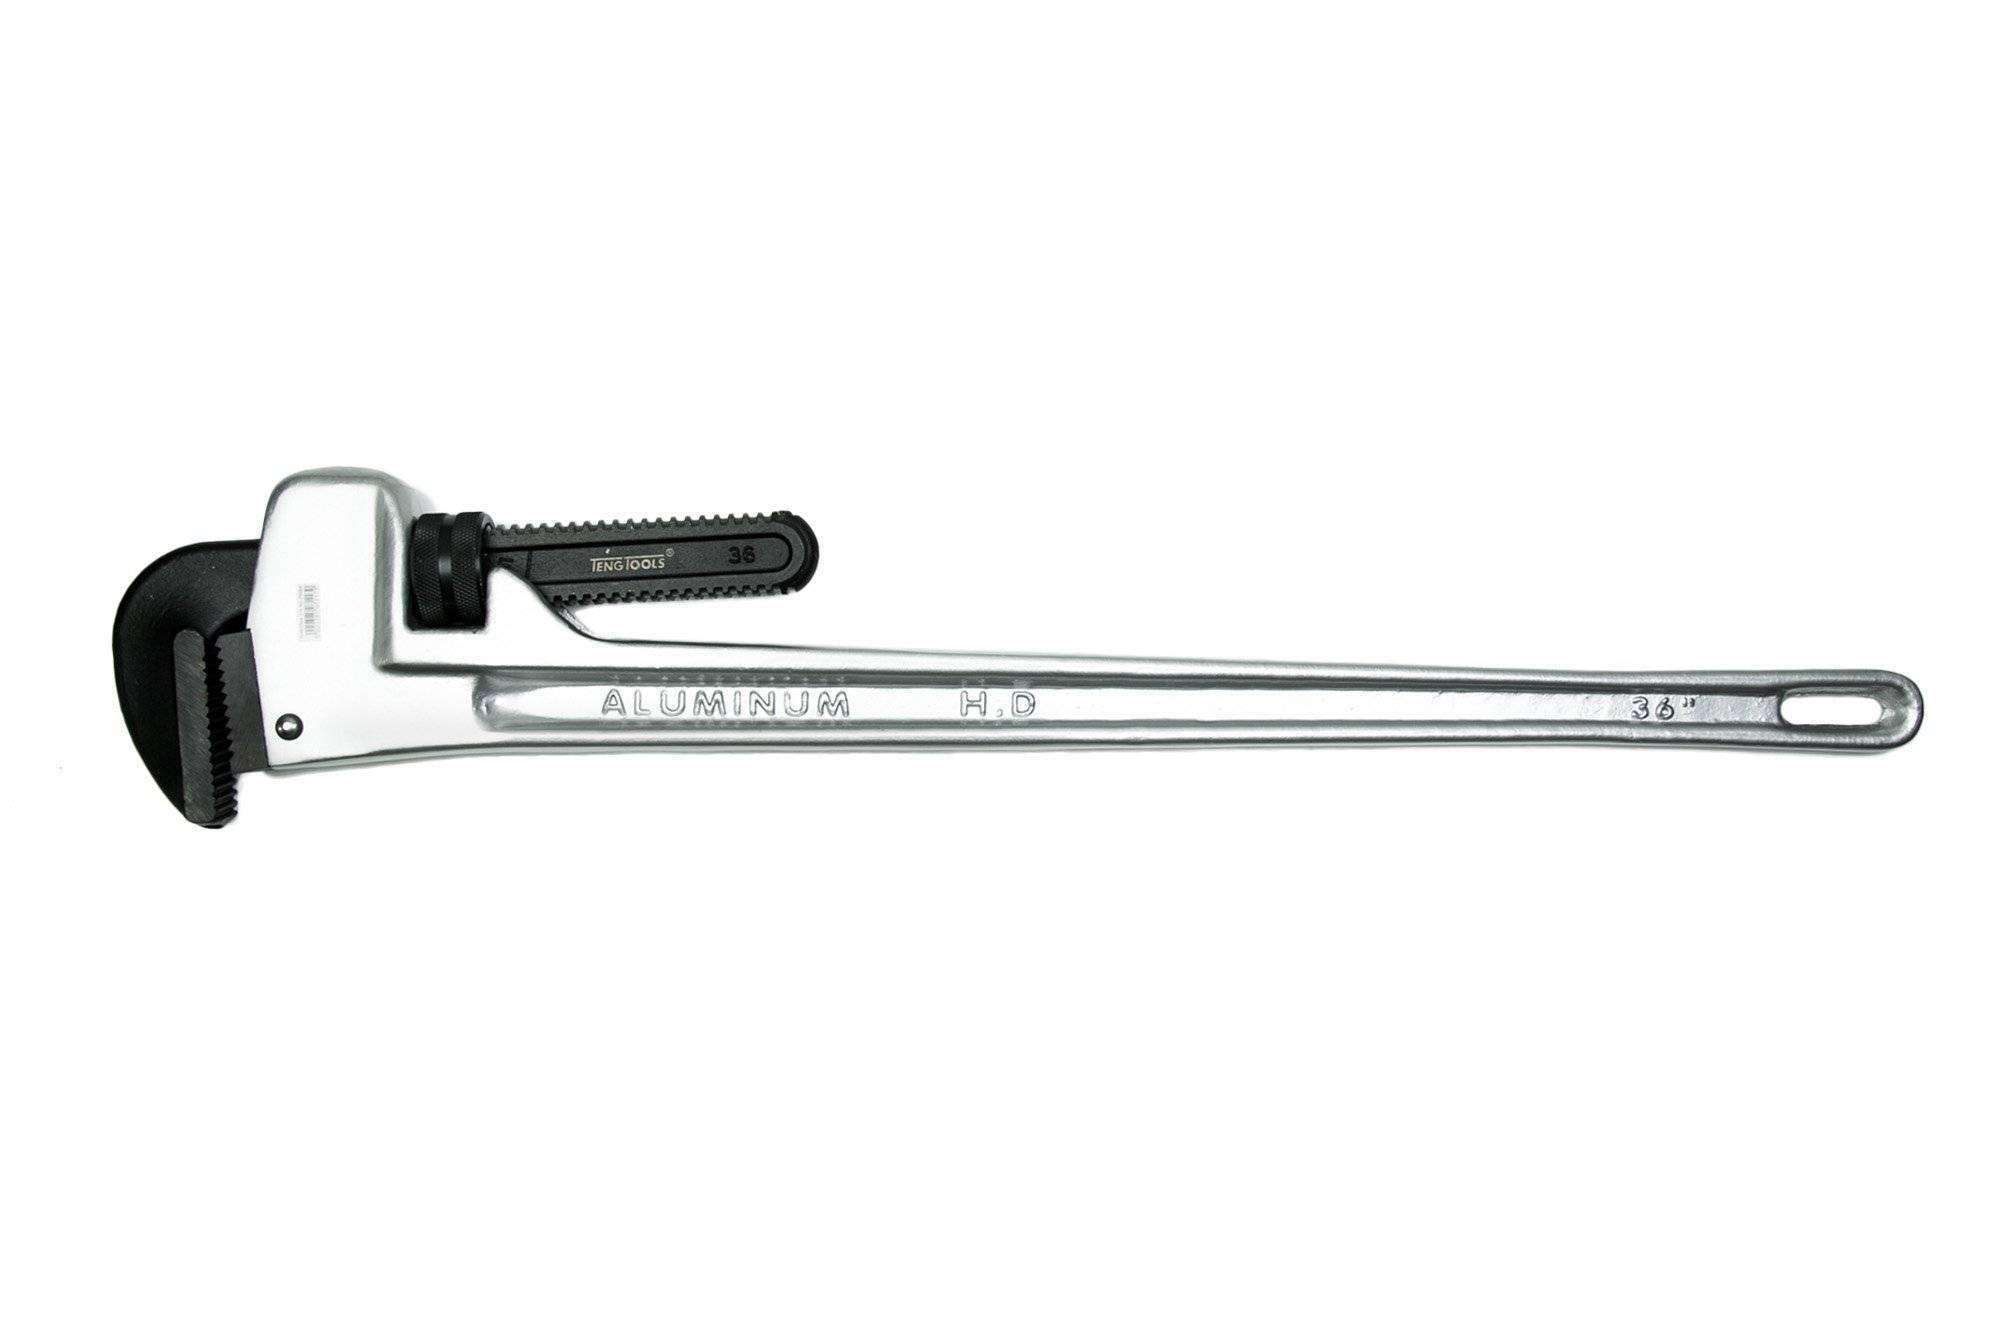 36 in. Aluminum Pipe Wrench